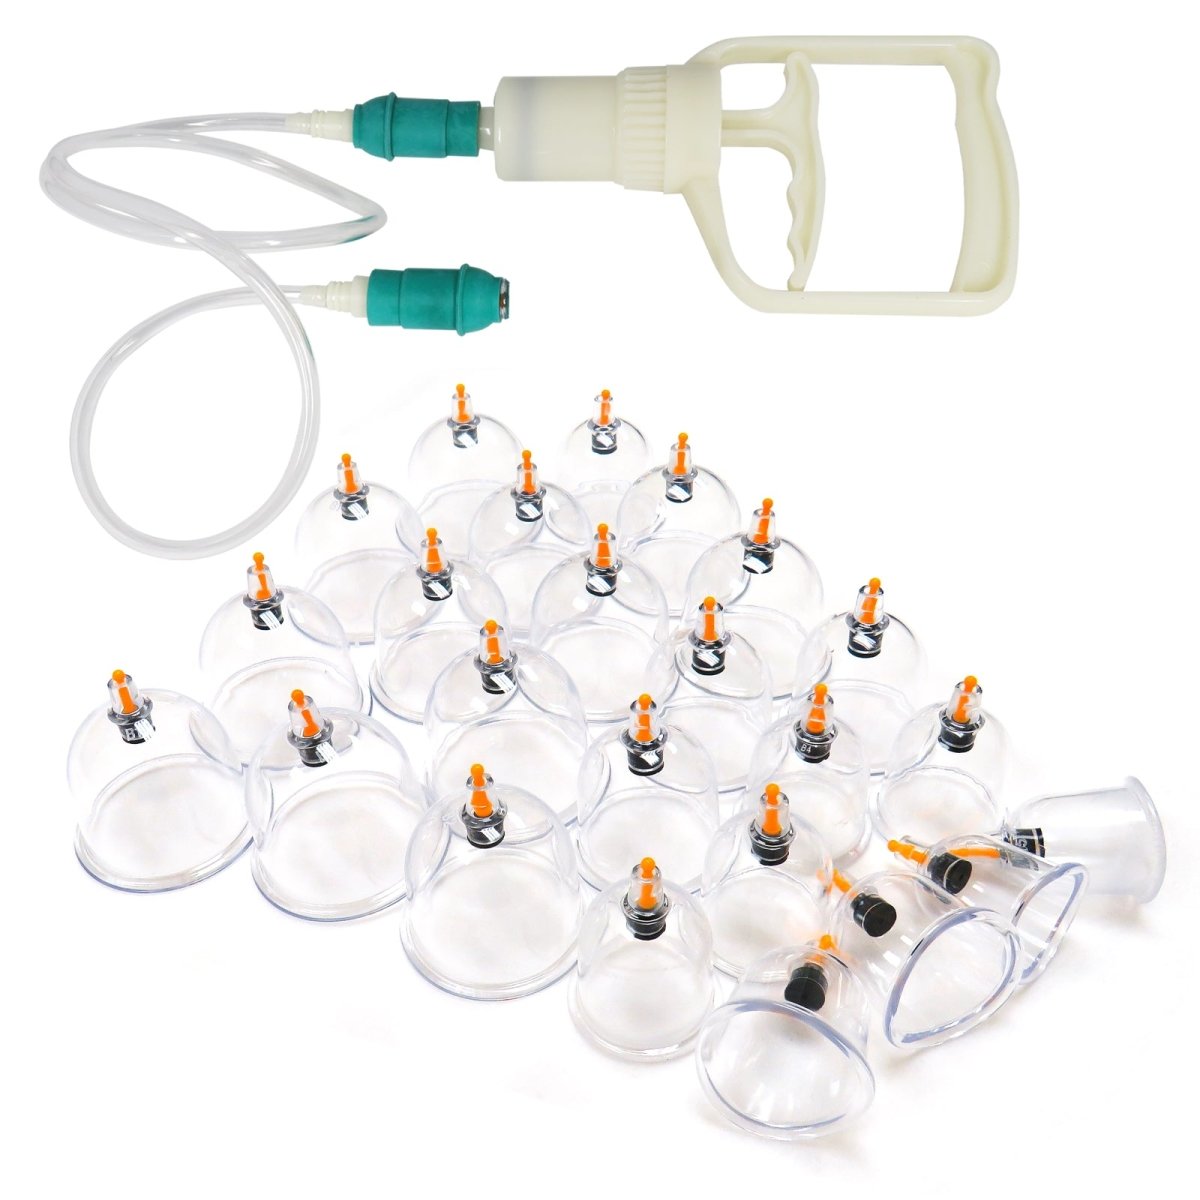 Kang Zhu Vacuum Suction Cupping Therapy Kit - 24 Cups - GreenLife-Massage Supplies